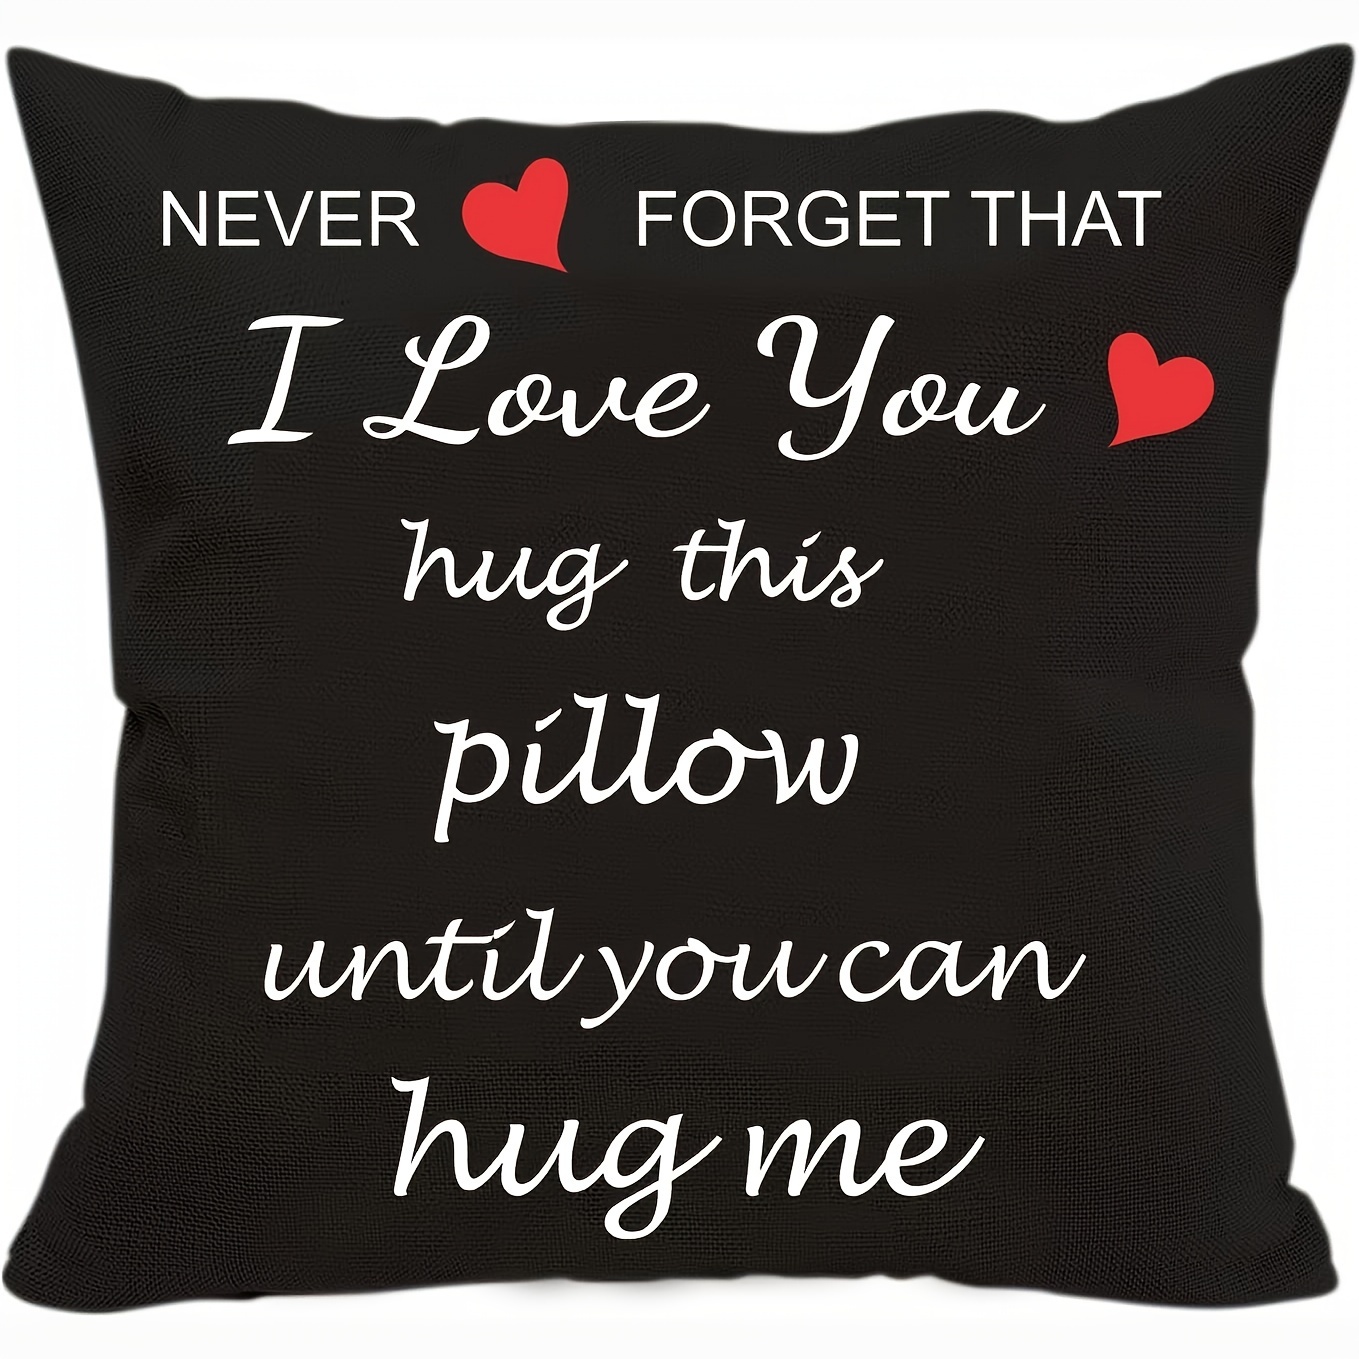 Hugs and Kisses Love Inspirational Quote Words Pillow Cushion